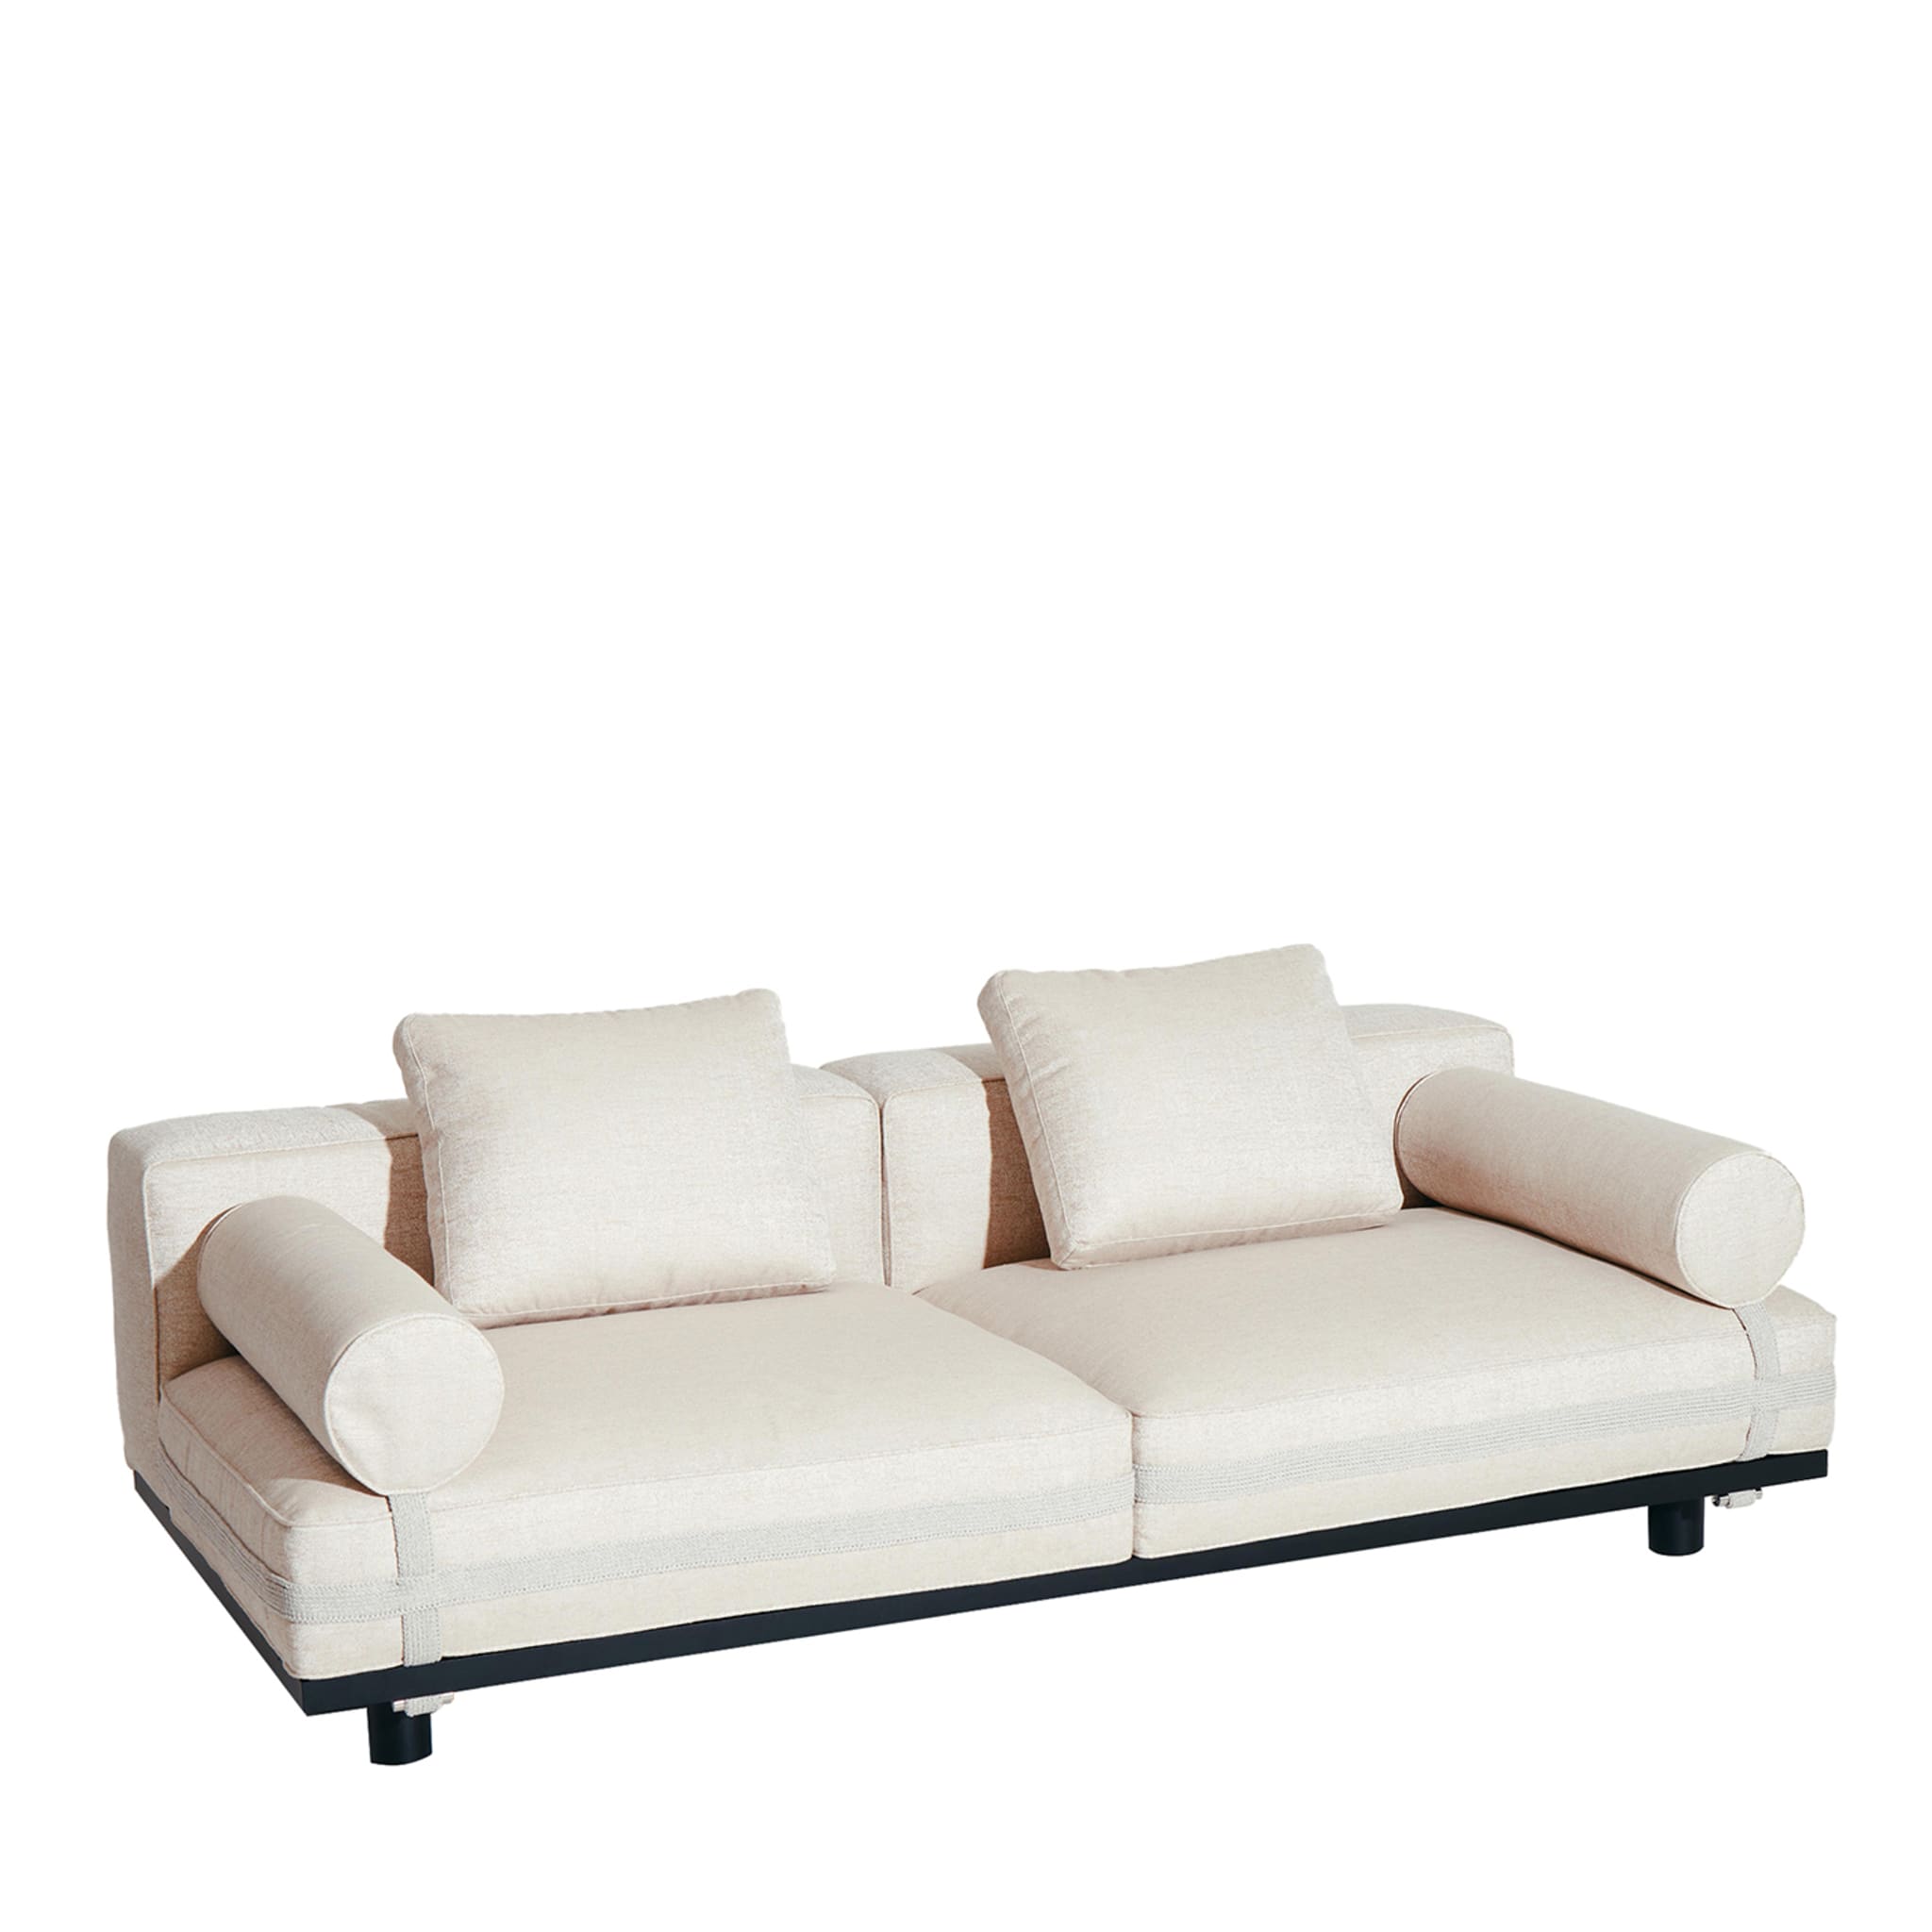 Saint Remy White 2-Seater Sofa #2 by Luca Nichetto - Main view